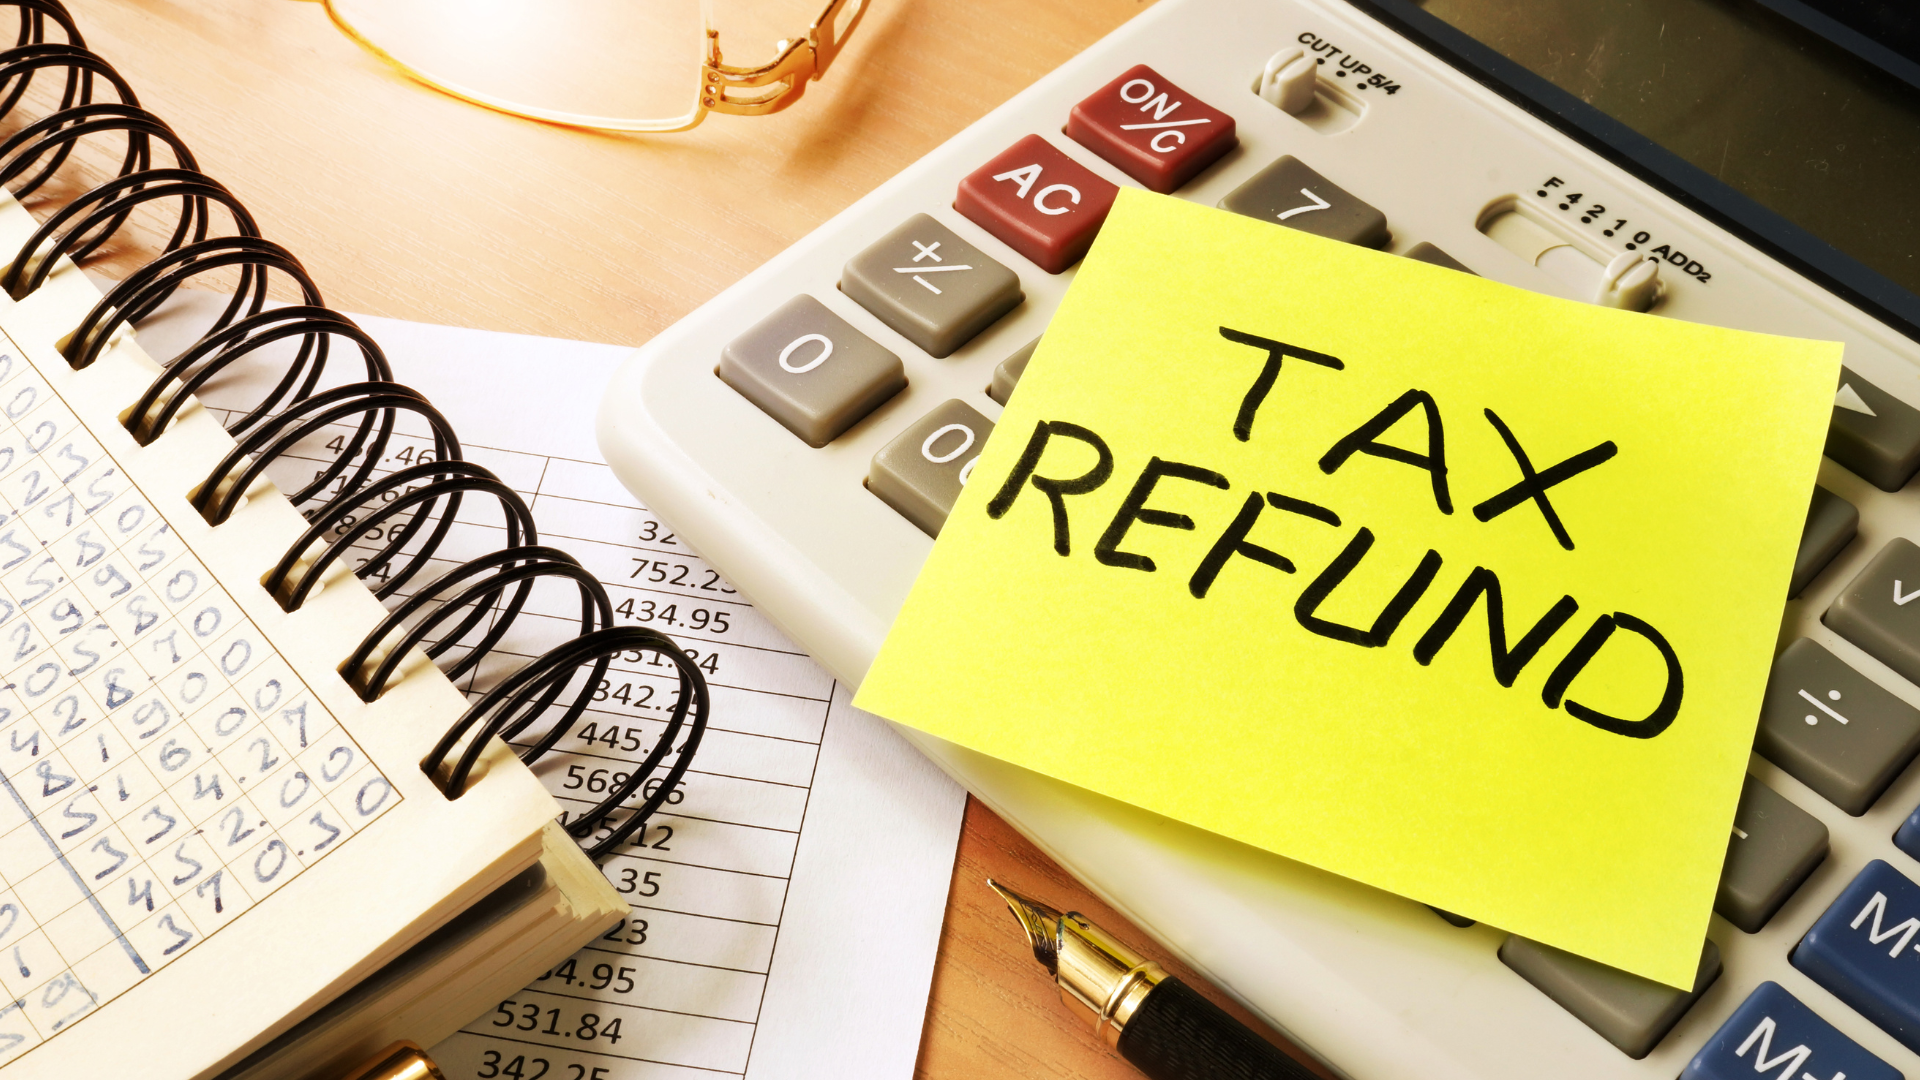 Efficient tax refund calculator to easily determine the amount of your tax refund